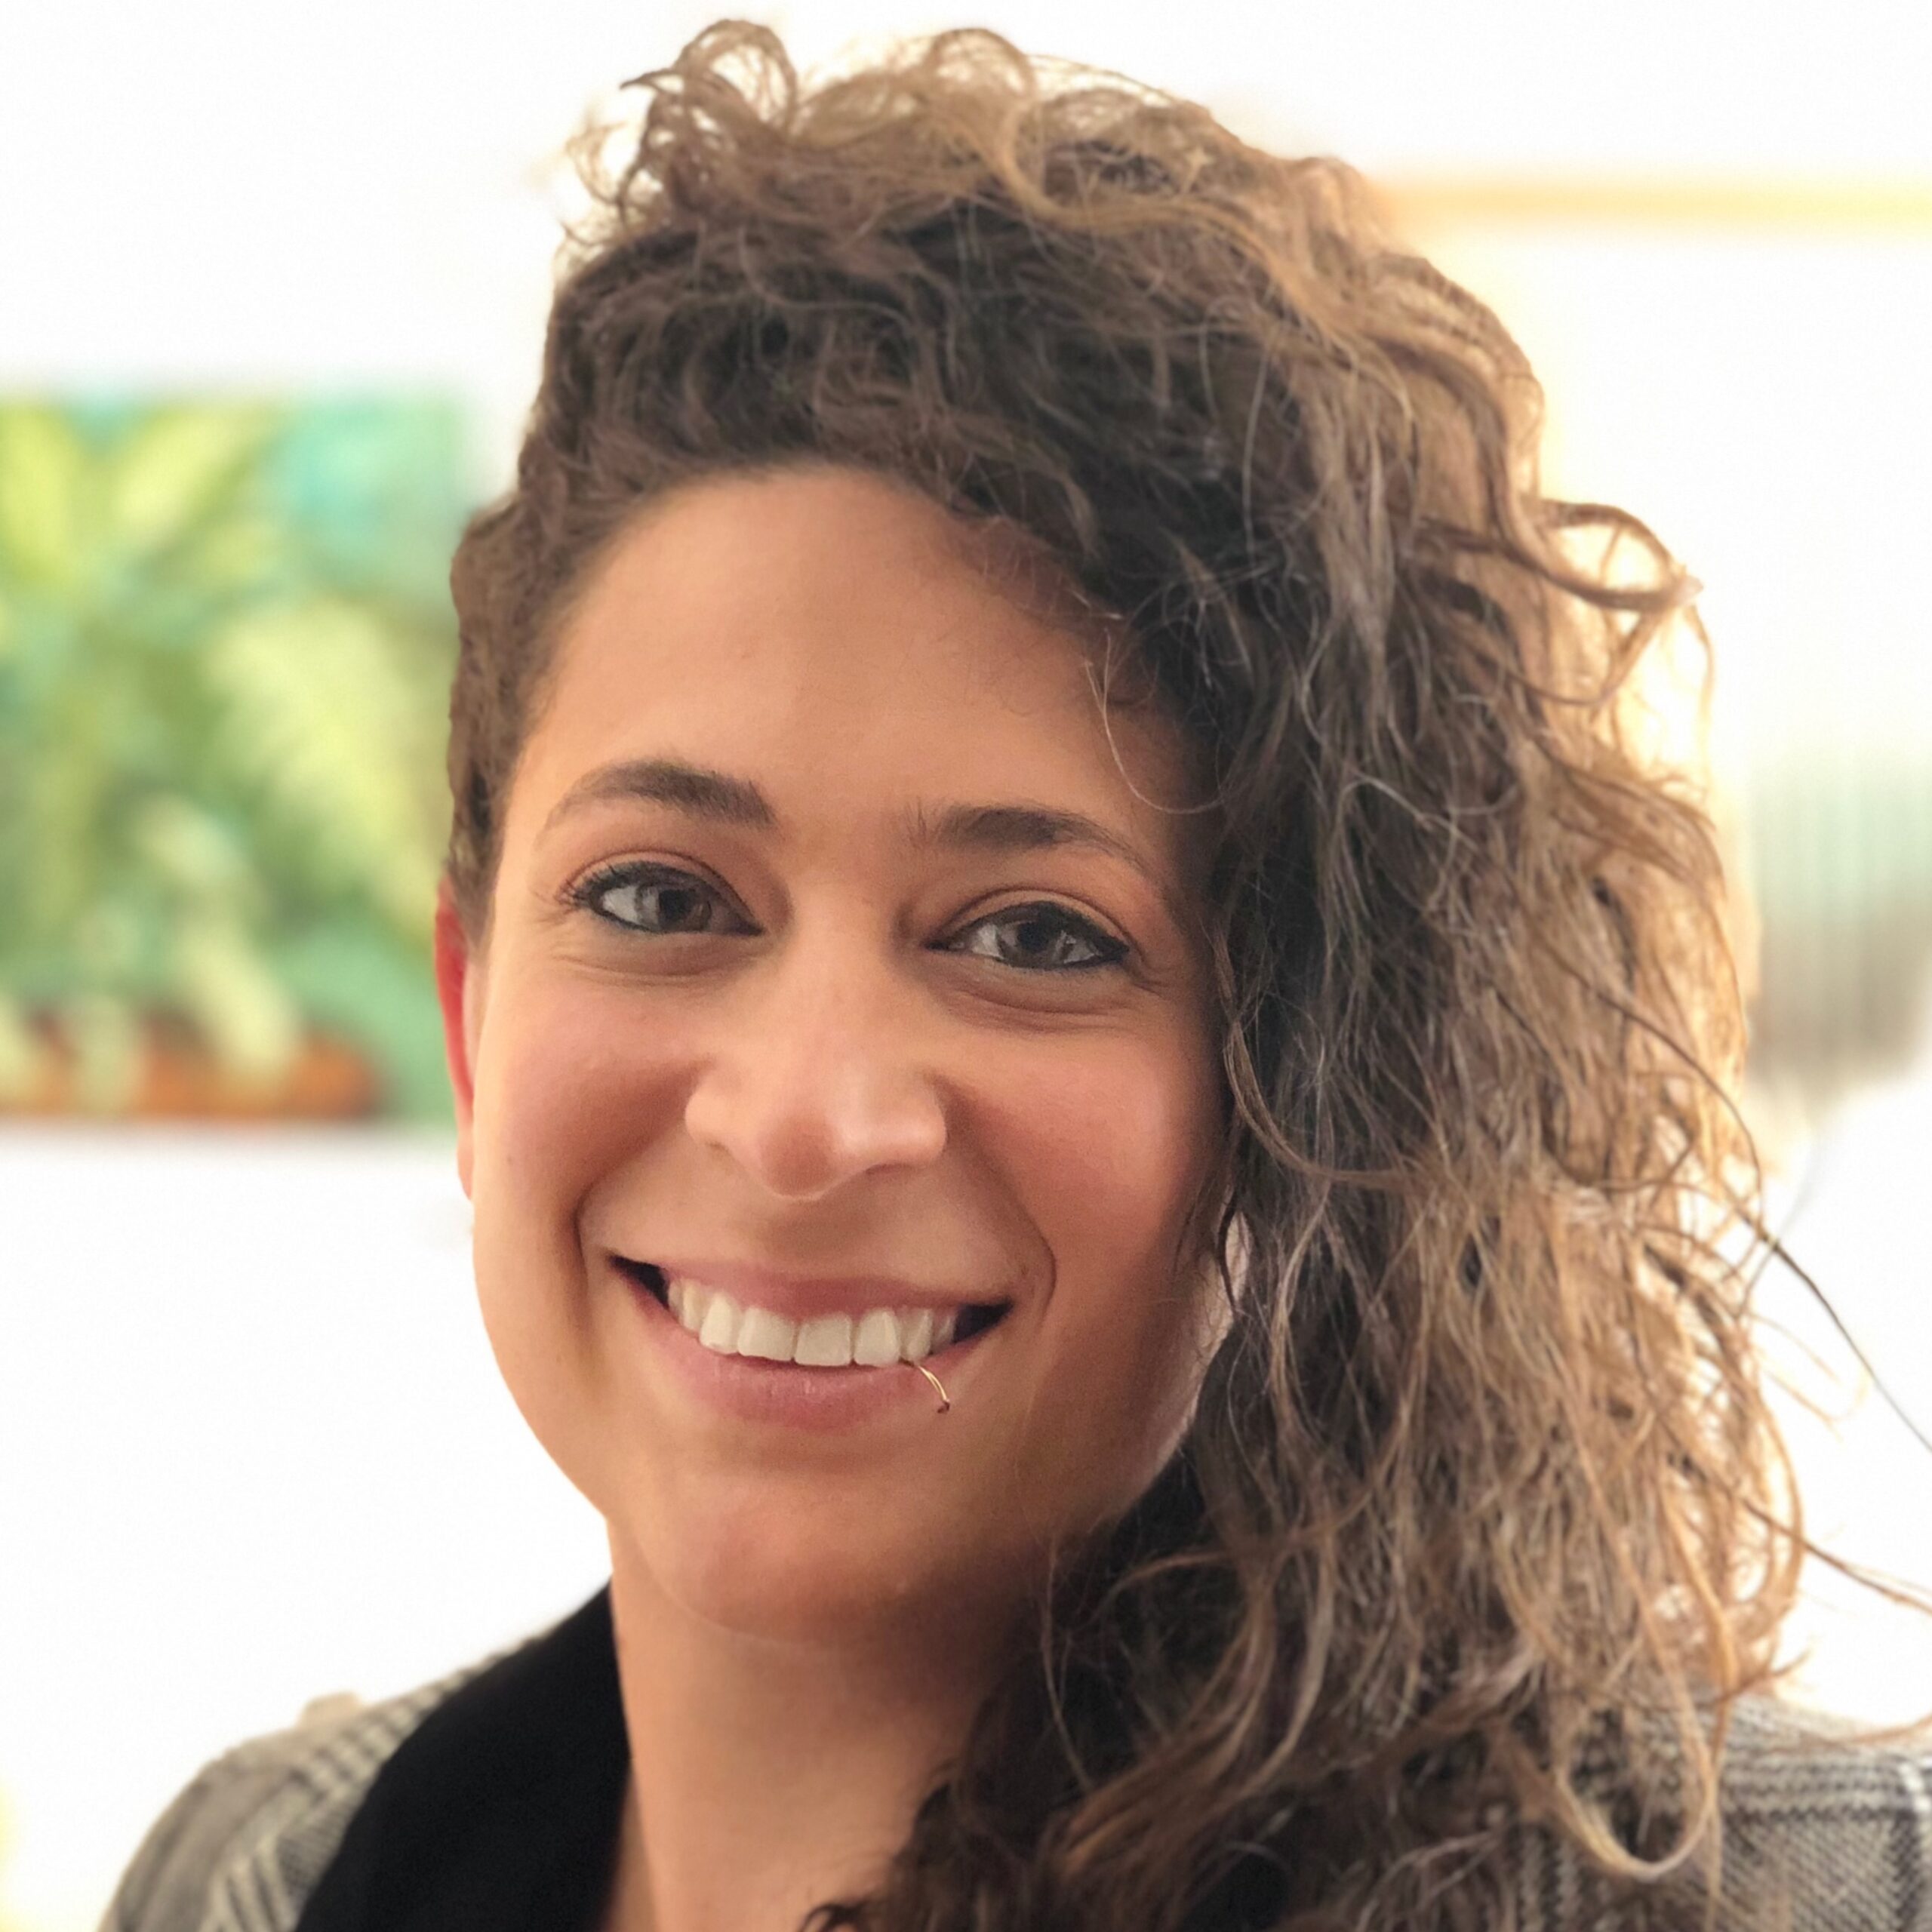 Jenna Segal has worked nationally and internationally across the food system to develop and support equitable, sustainable food systems that positively impact the health and well-being of people around the world